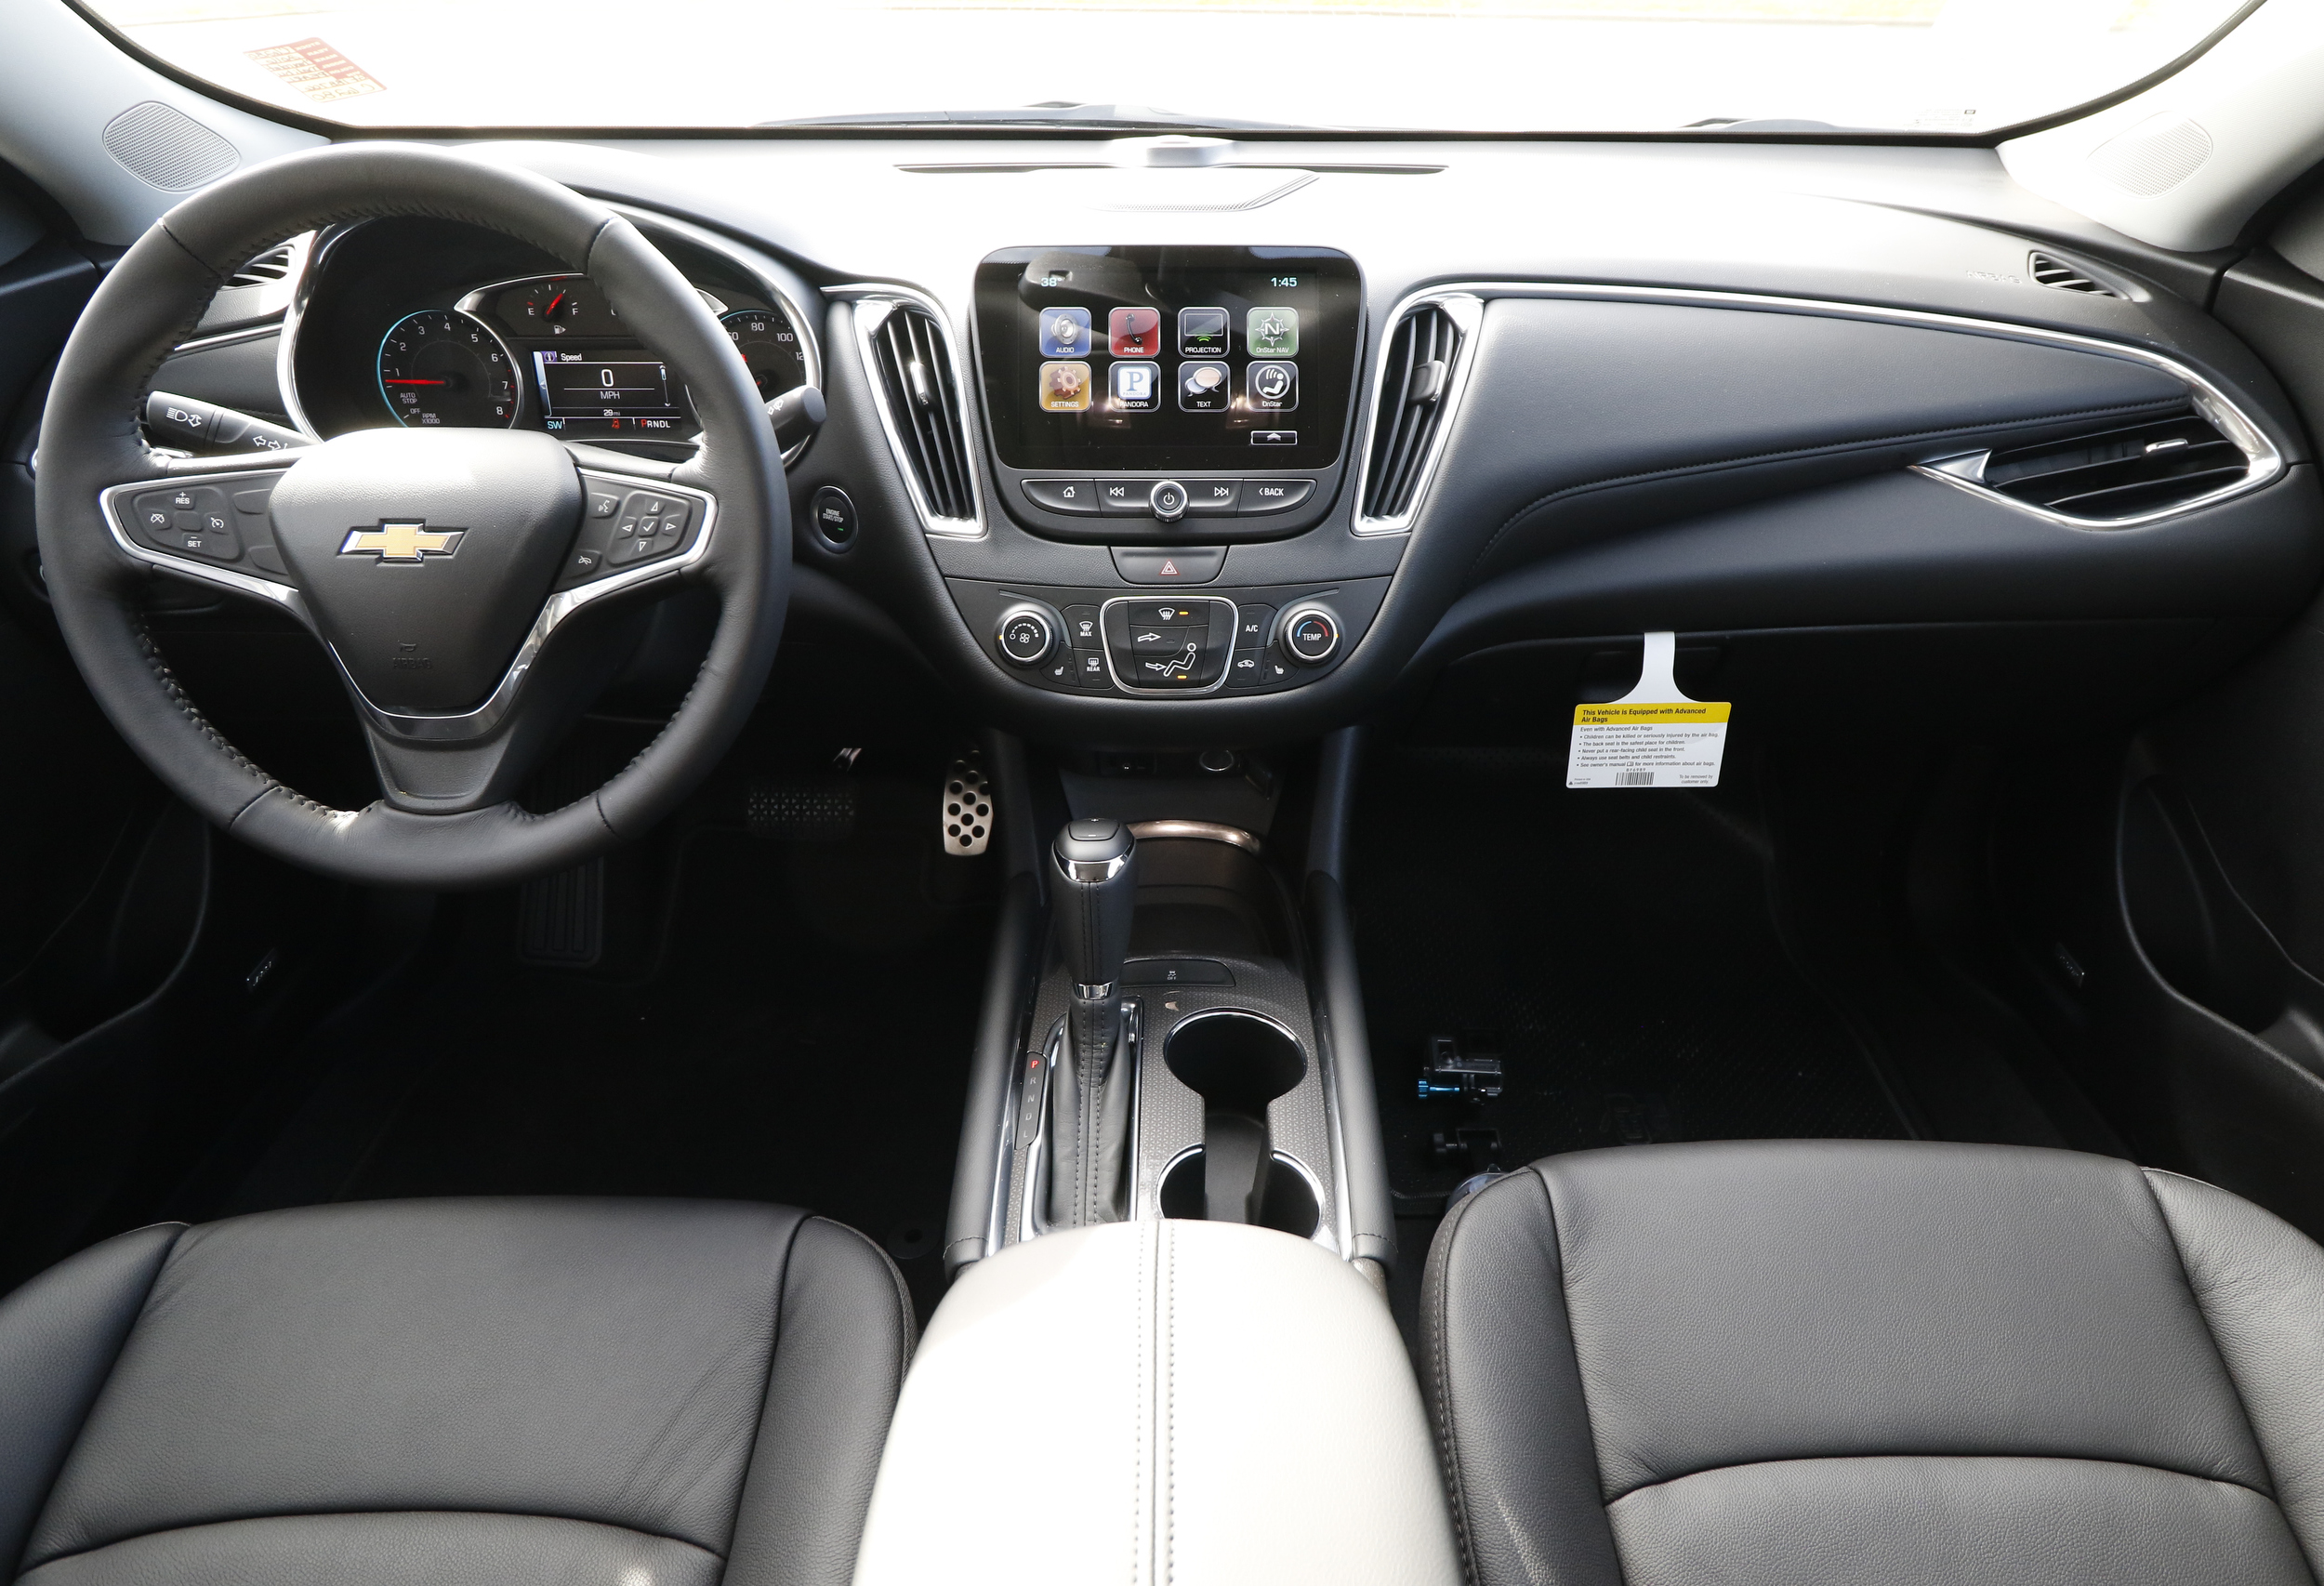 Test Drive: 2016 Chevy Malibu features turbo power